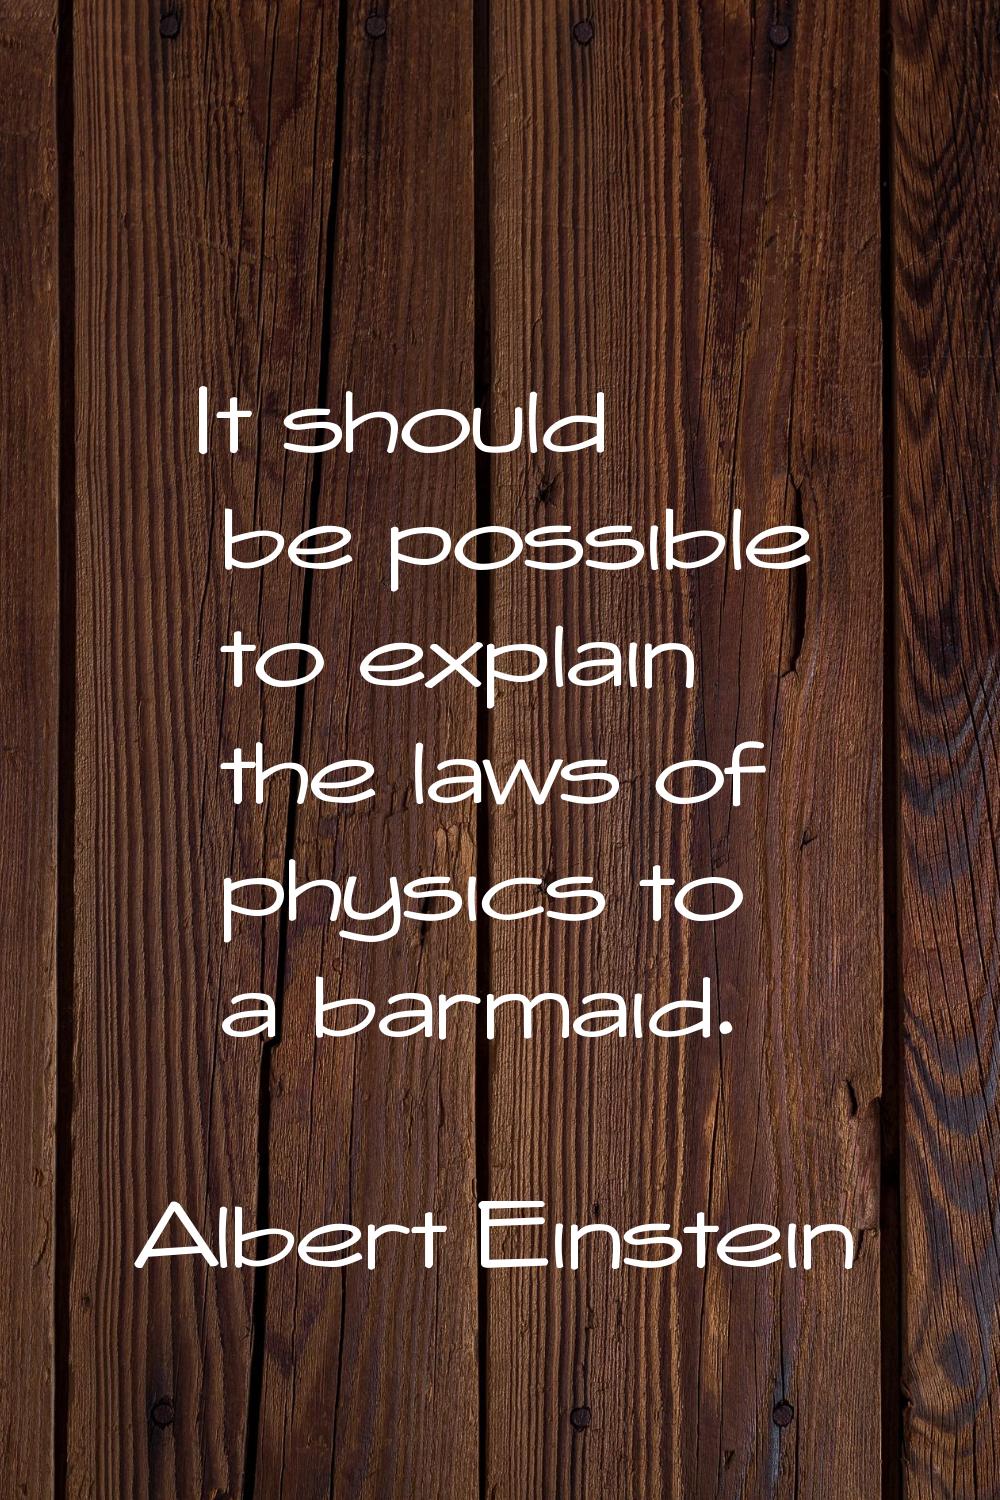 It should be possible to explain the laws of physics to a barmaid.